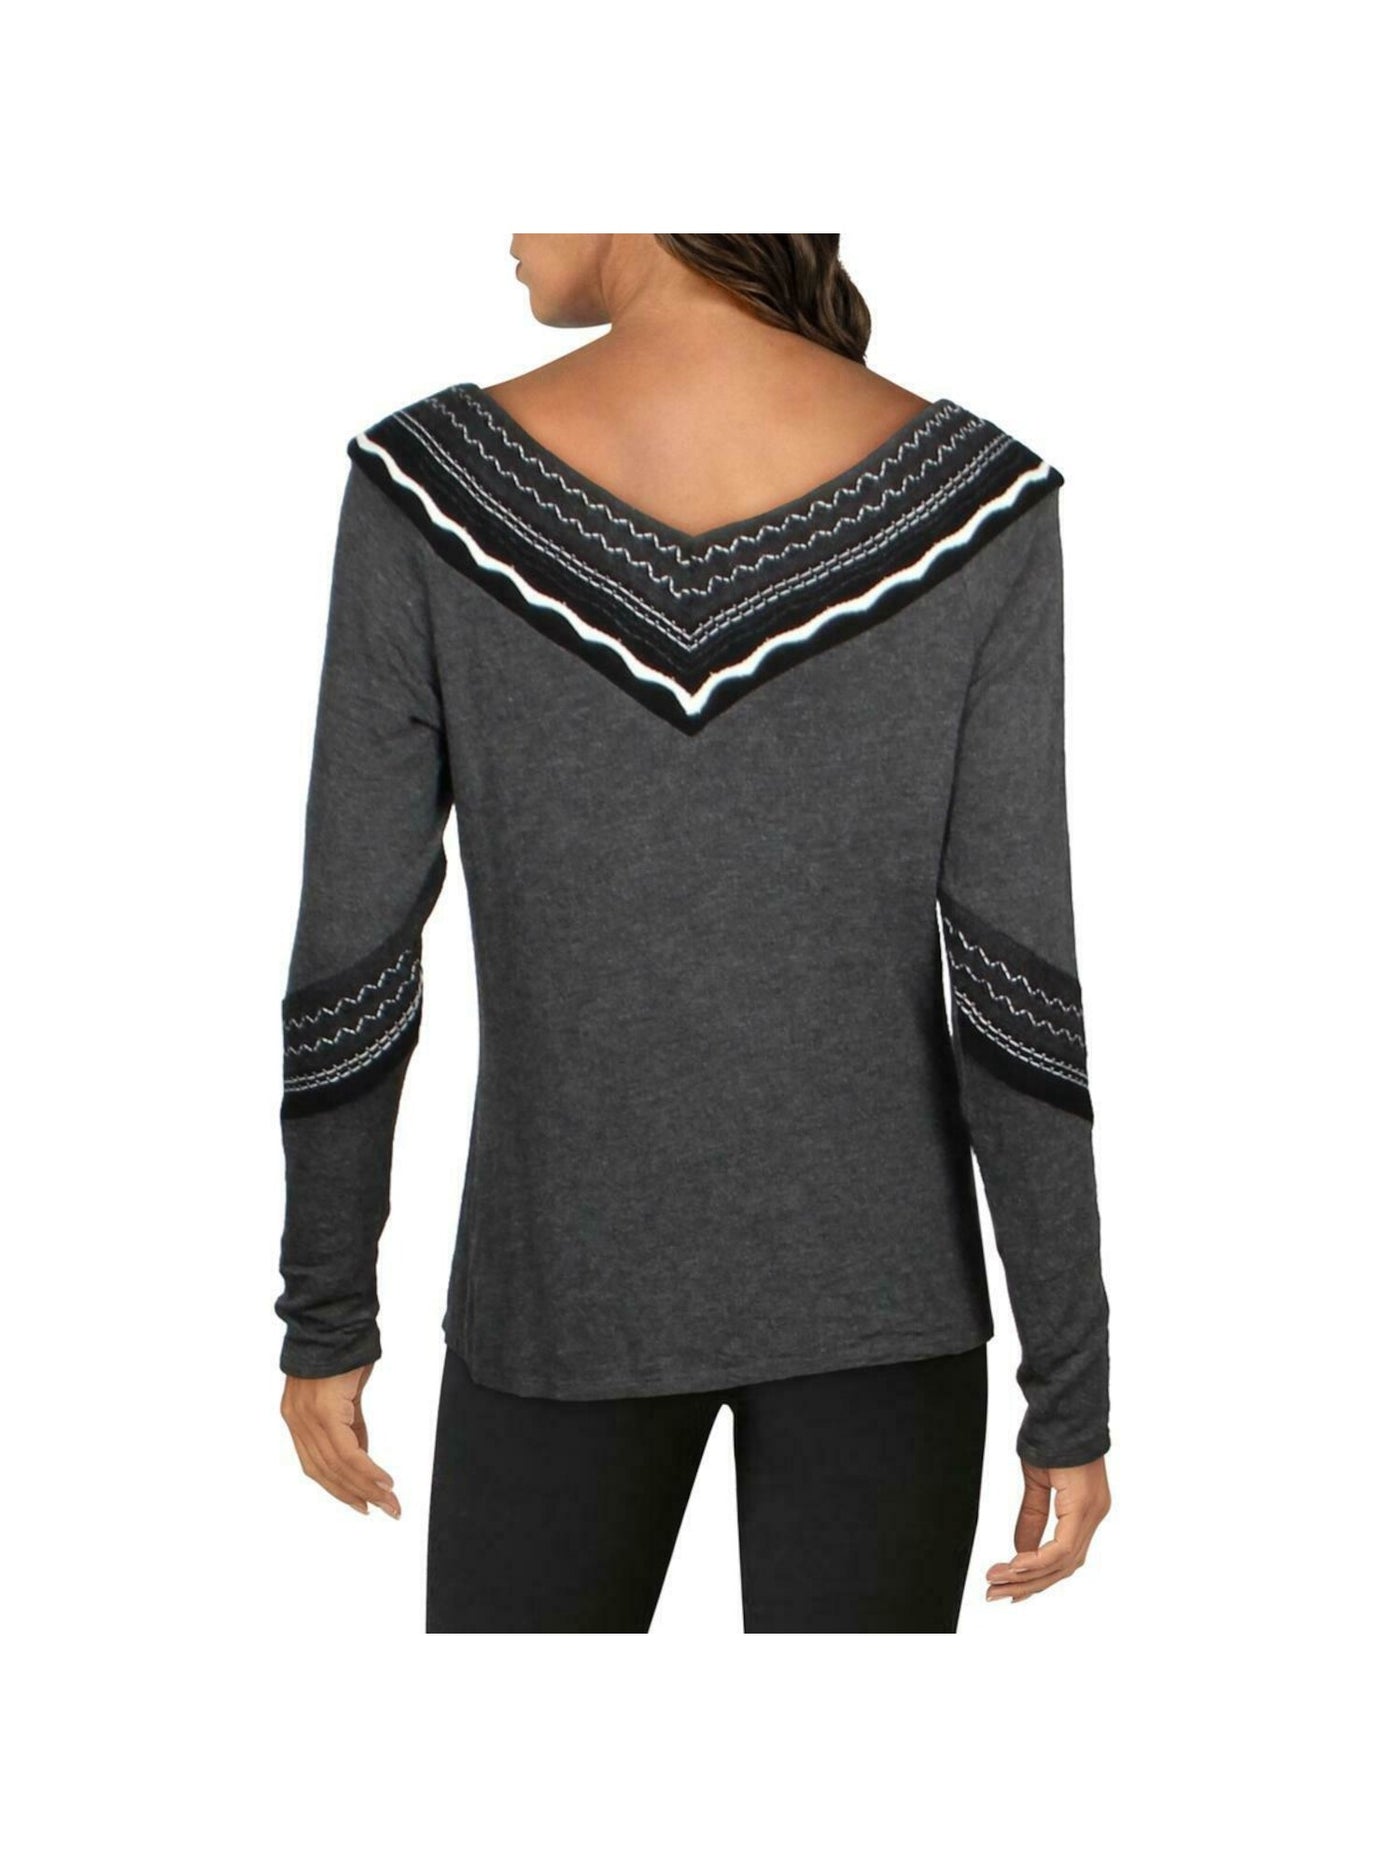 BAILEY44 Womens Gray Stretch Embroidered Printed Long Sleeve V Neck Sweater XS